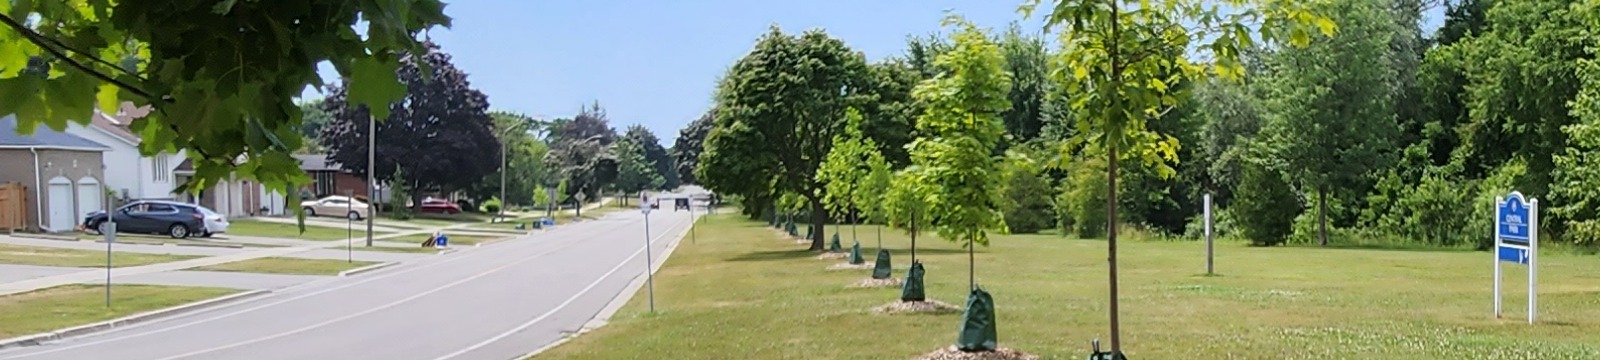 Newly planted trees along City road allowance